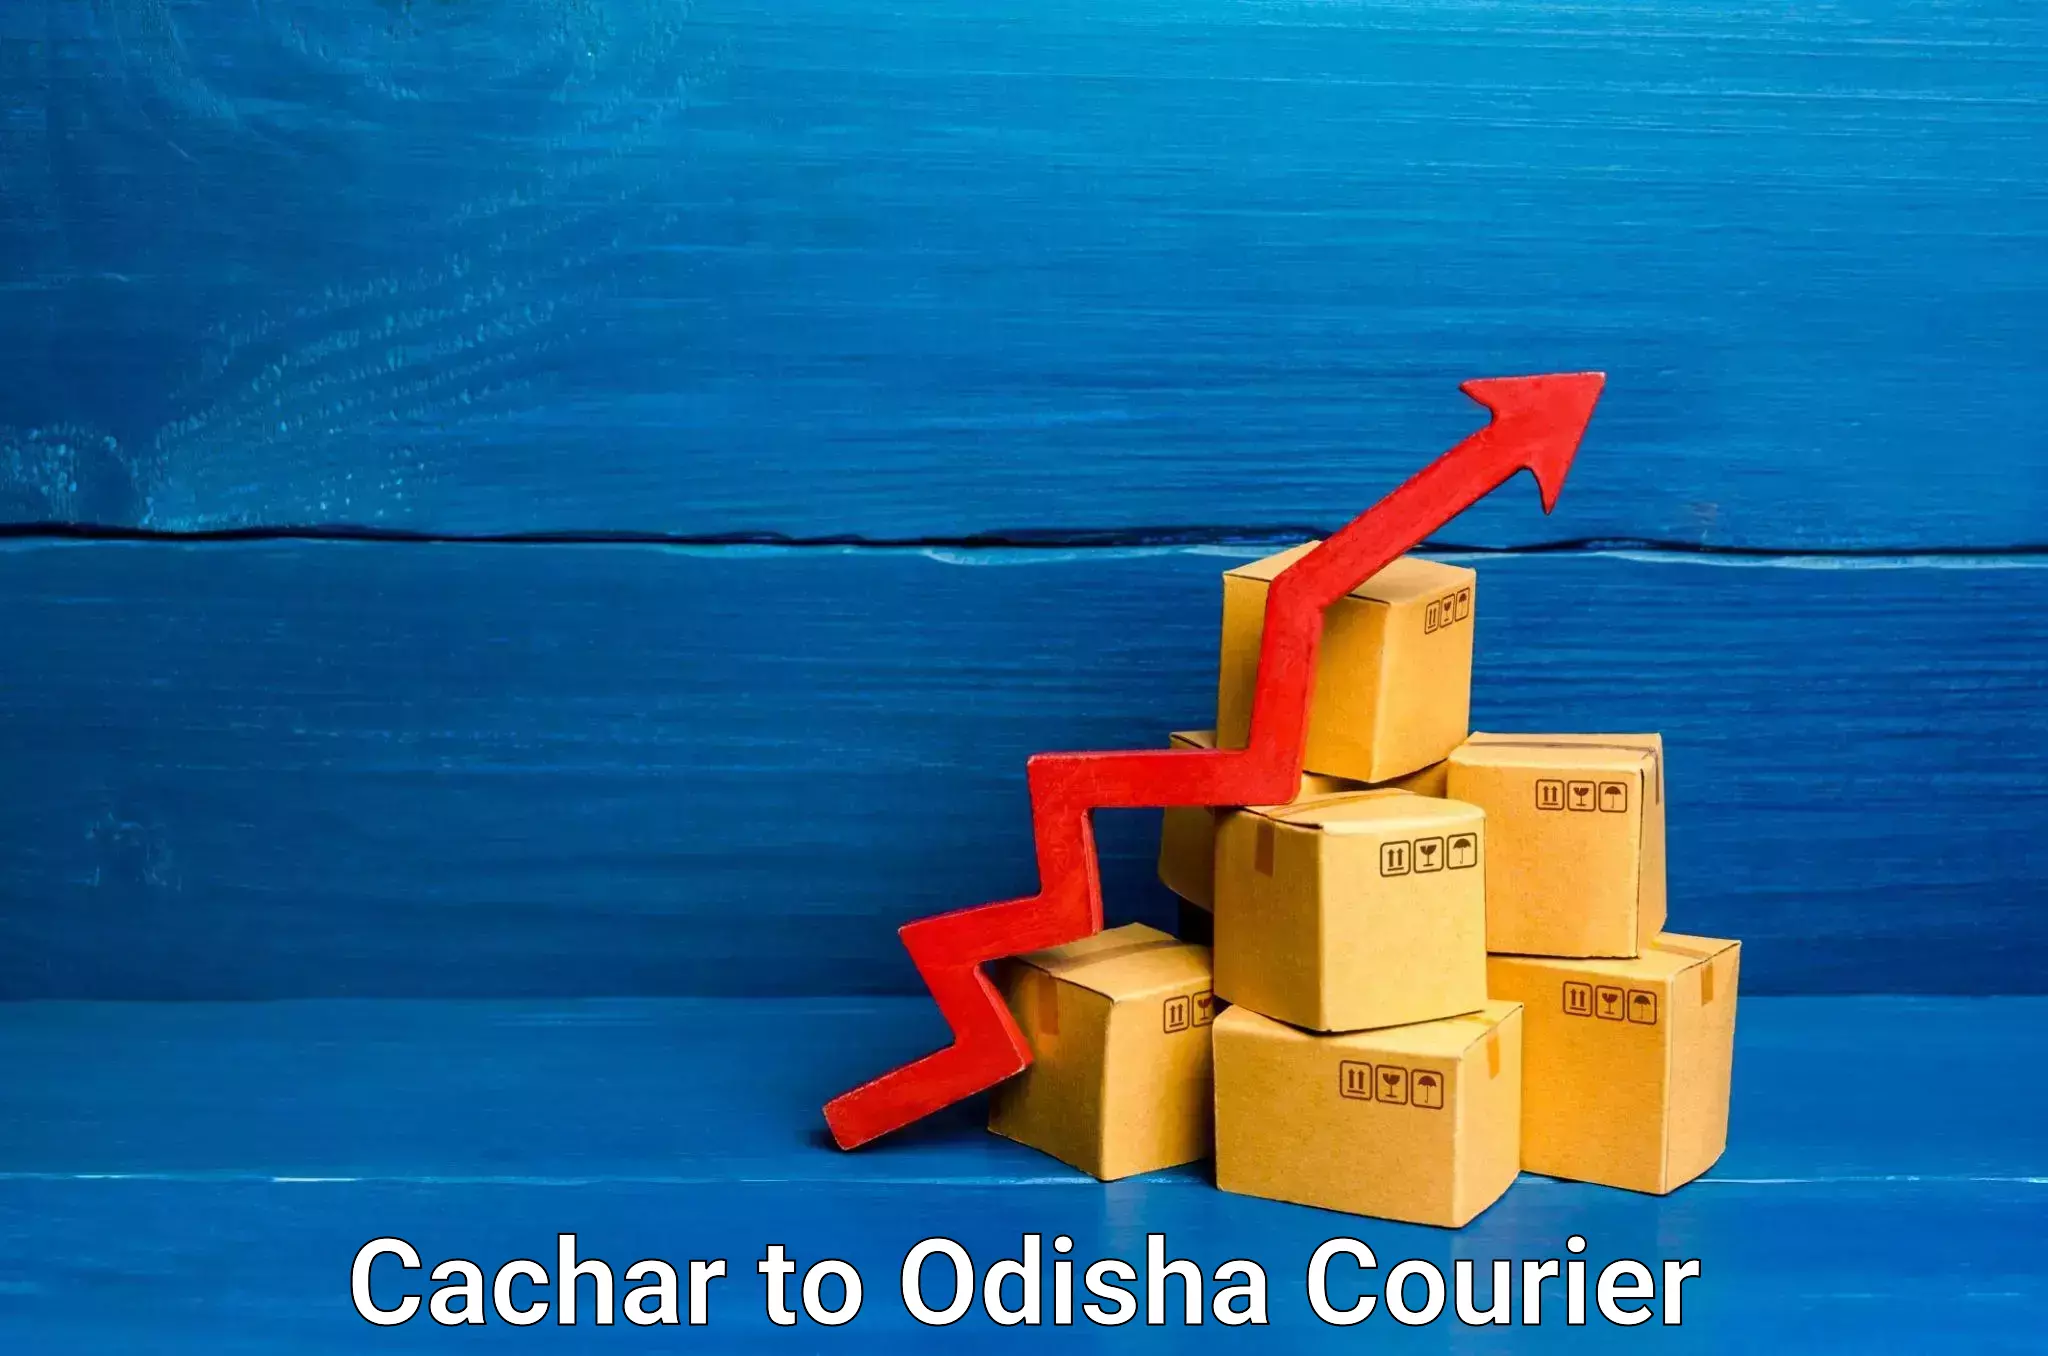 State-of-the-art courier technology Cachar to Aul